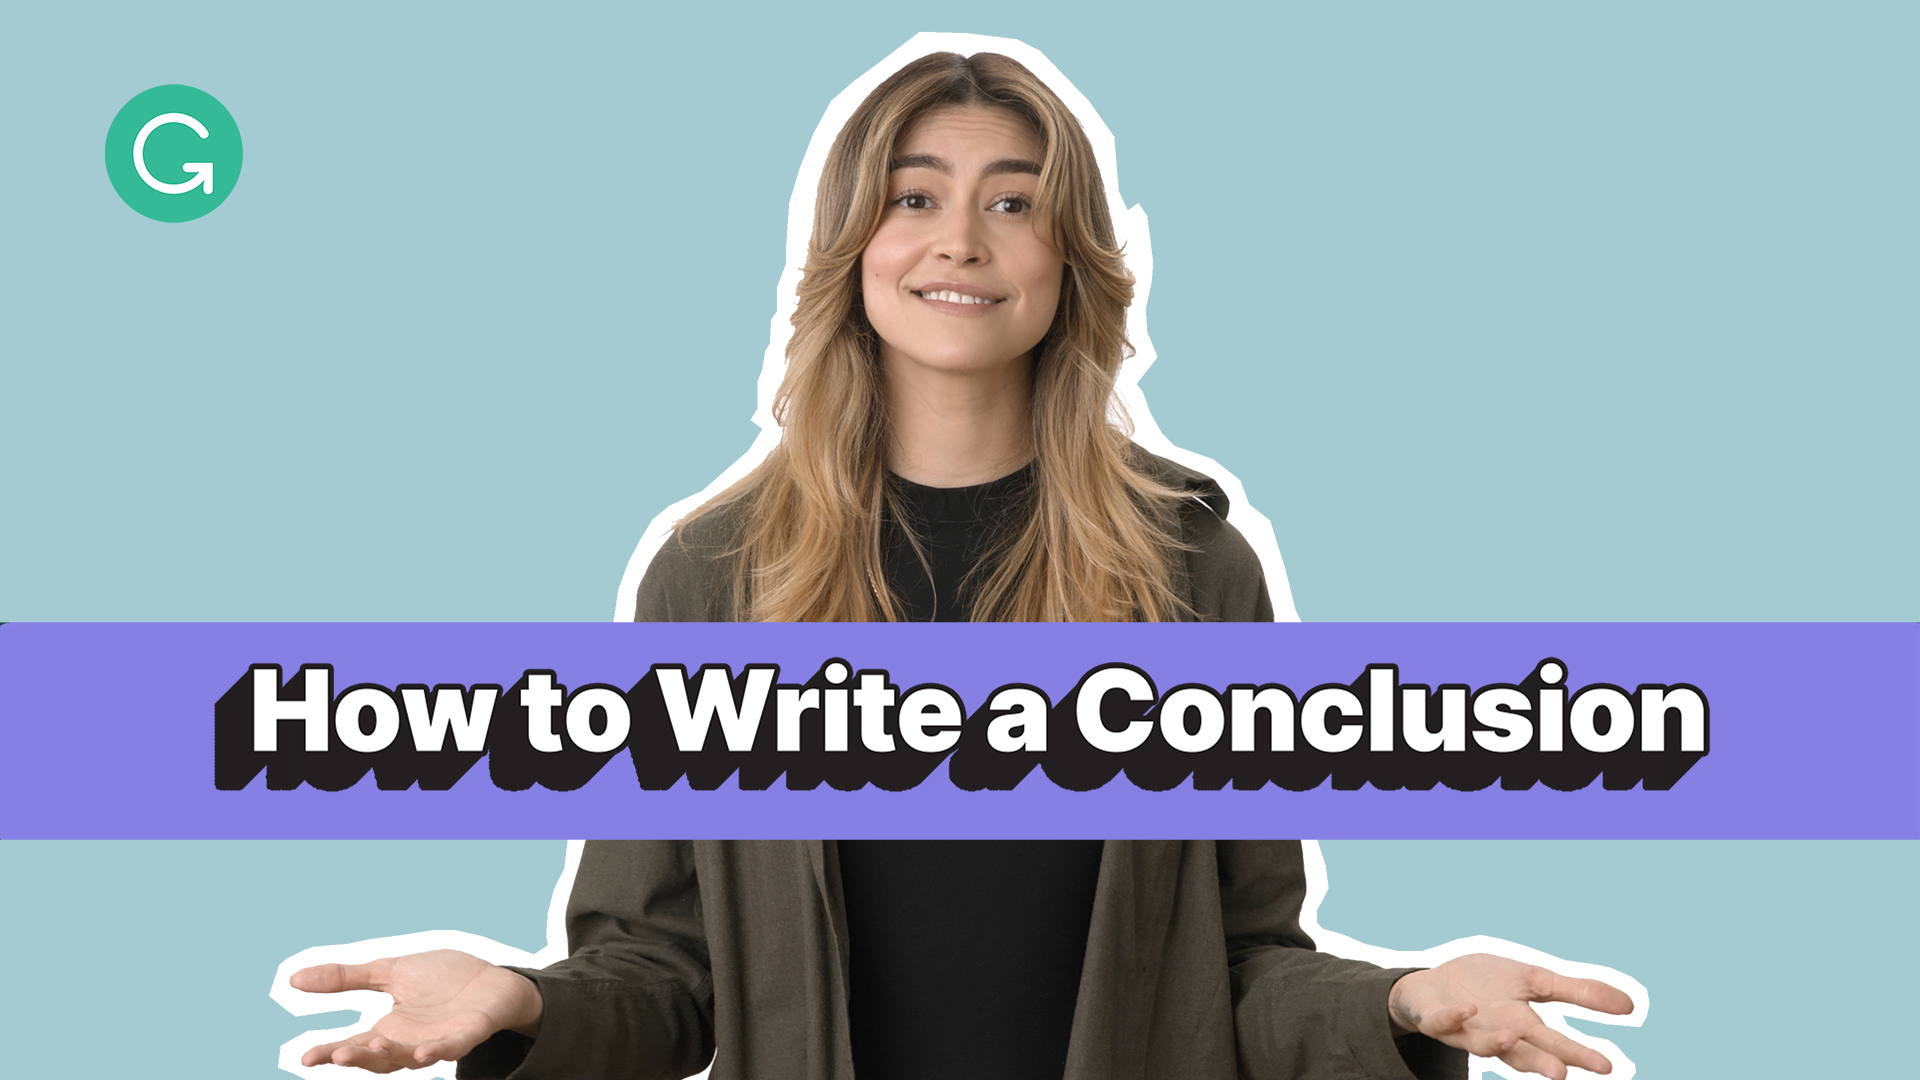 Play Video - Write a Conclusion